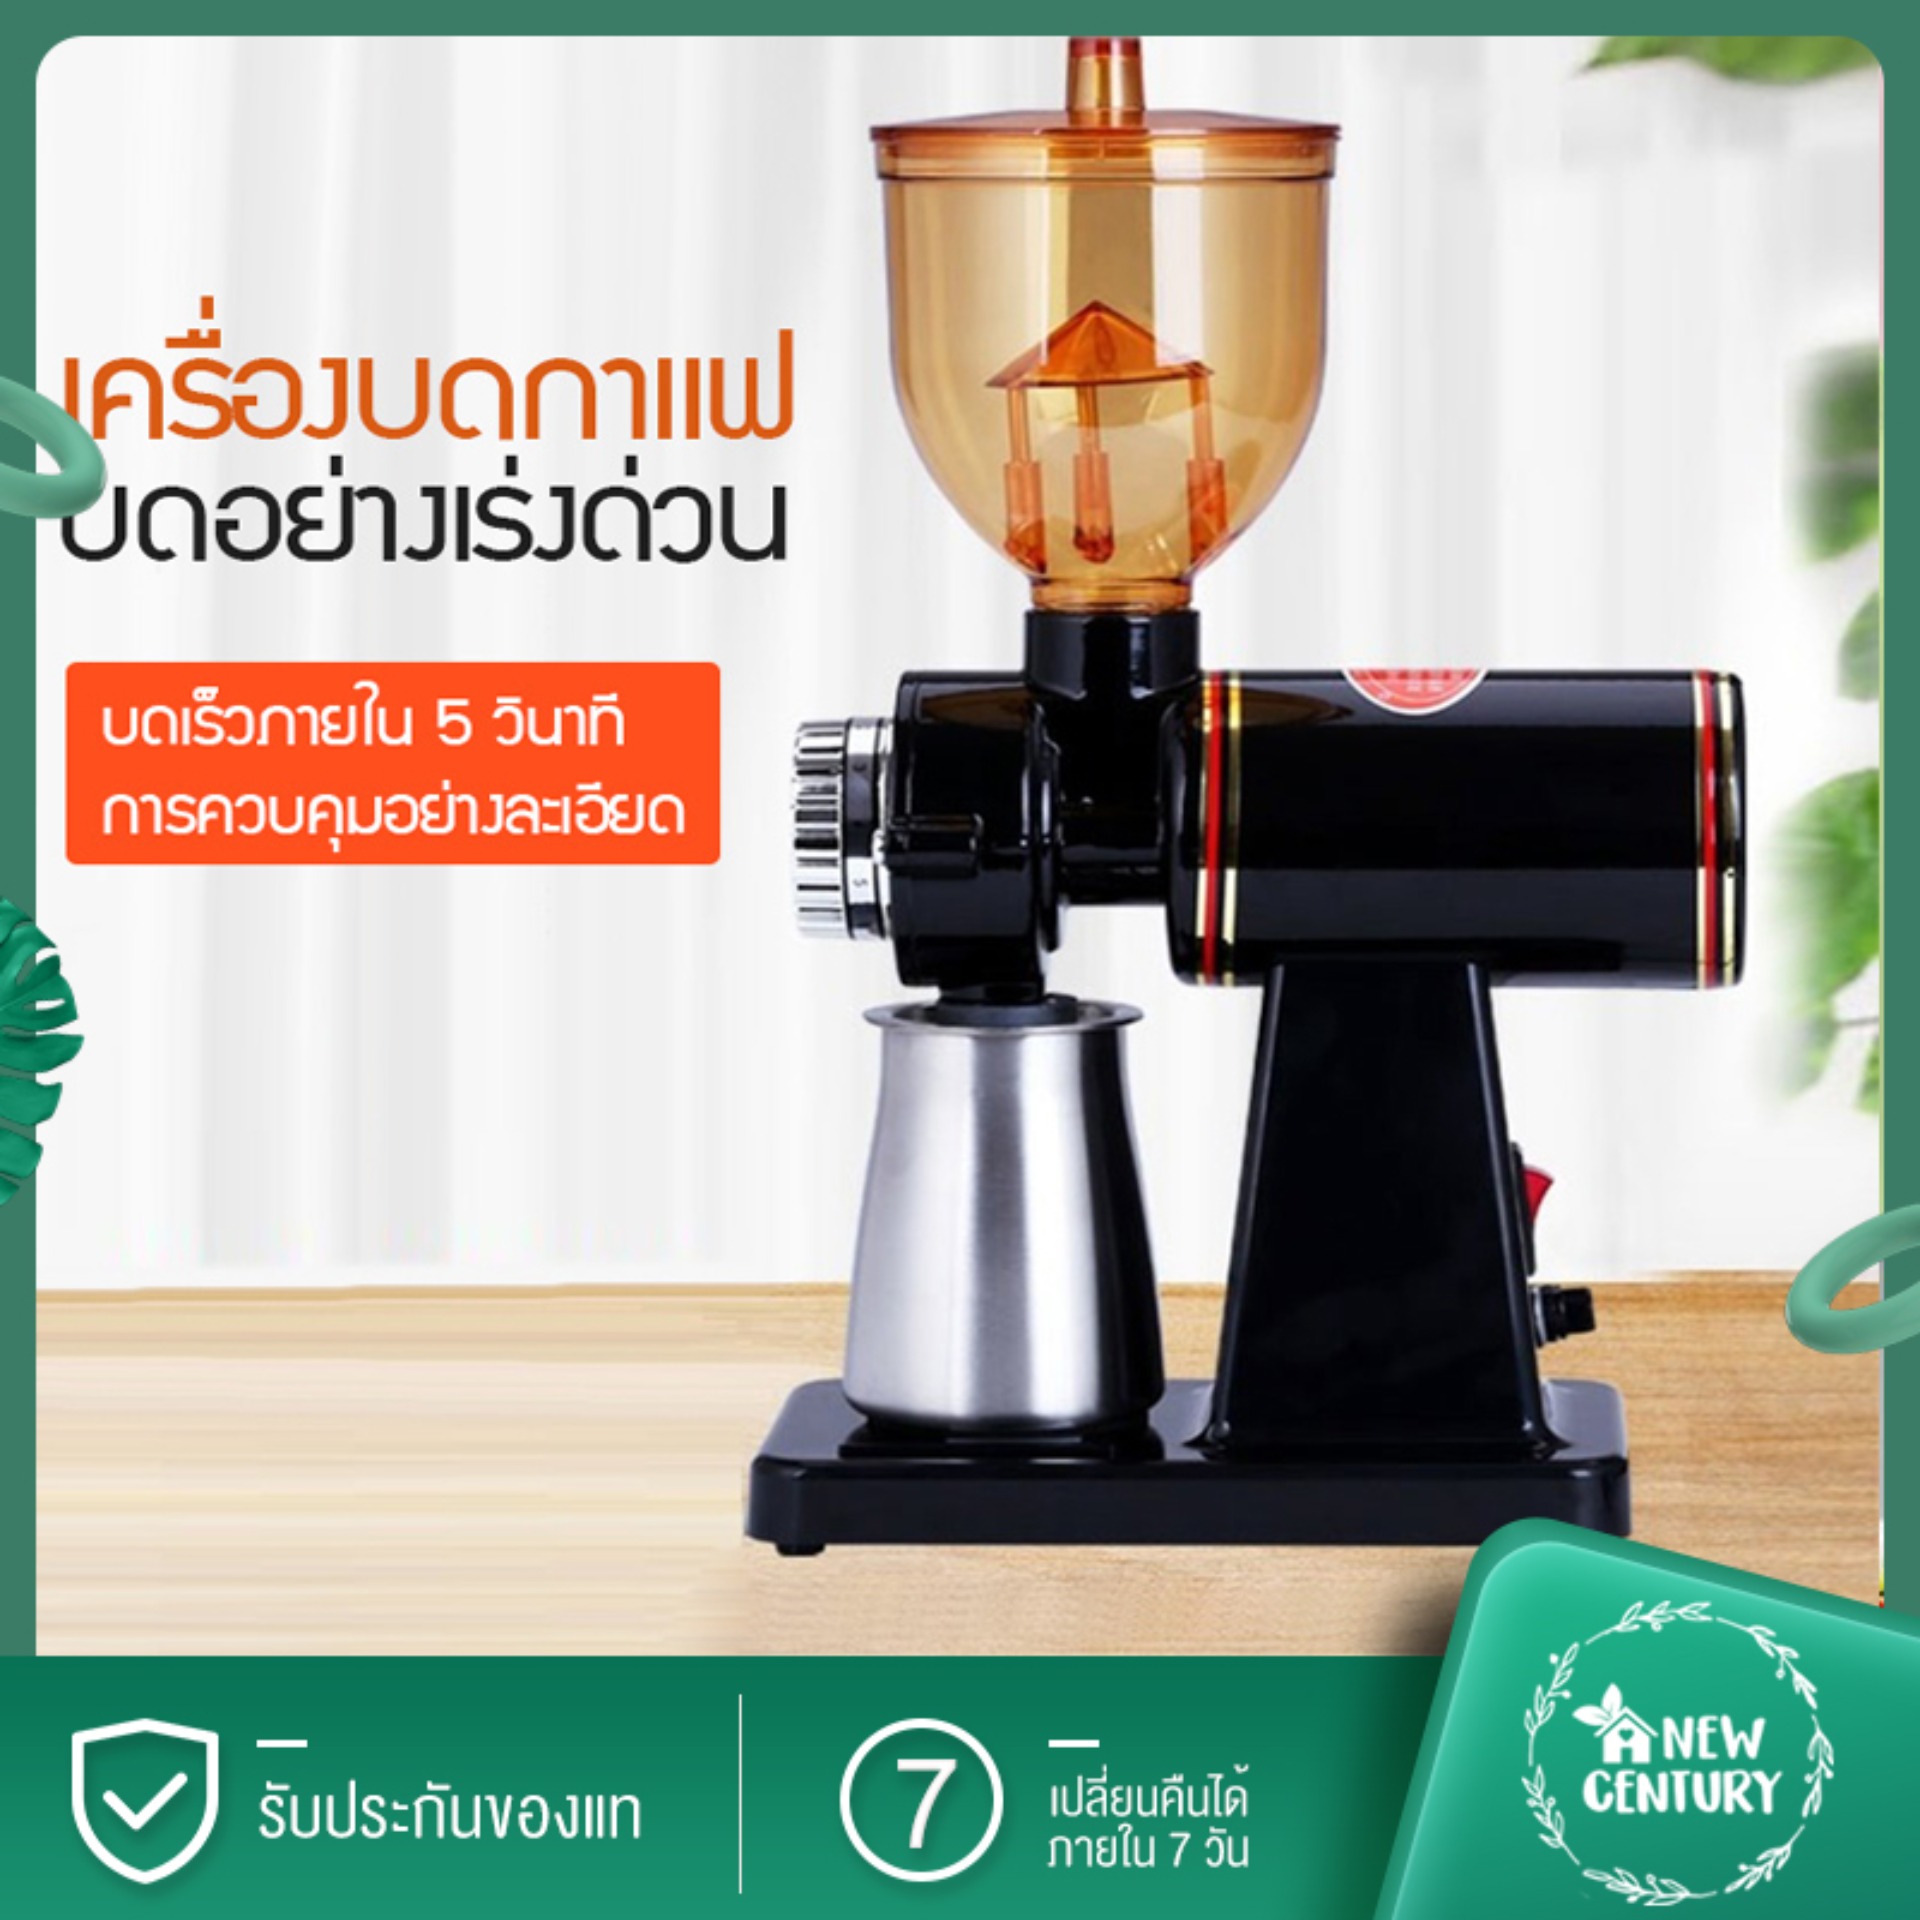 New Century เครื่องบดกาแฟ เครื่องบดเมล็ดกาแฟ 600N เครื่องทำกาแฟ เครื่องเตรียมเมล็ดกาแฟ อเนกประสงค์ Electric grinders Small commercial coffee grinders Household single mills